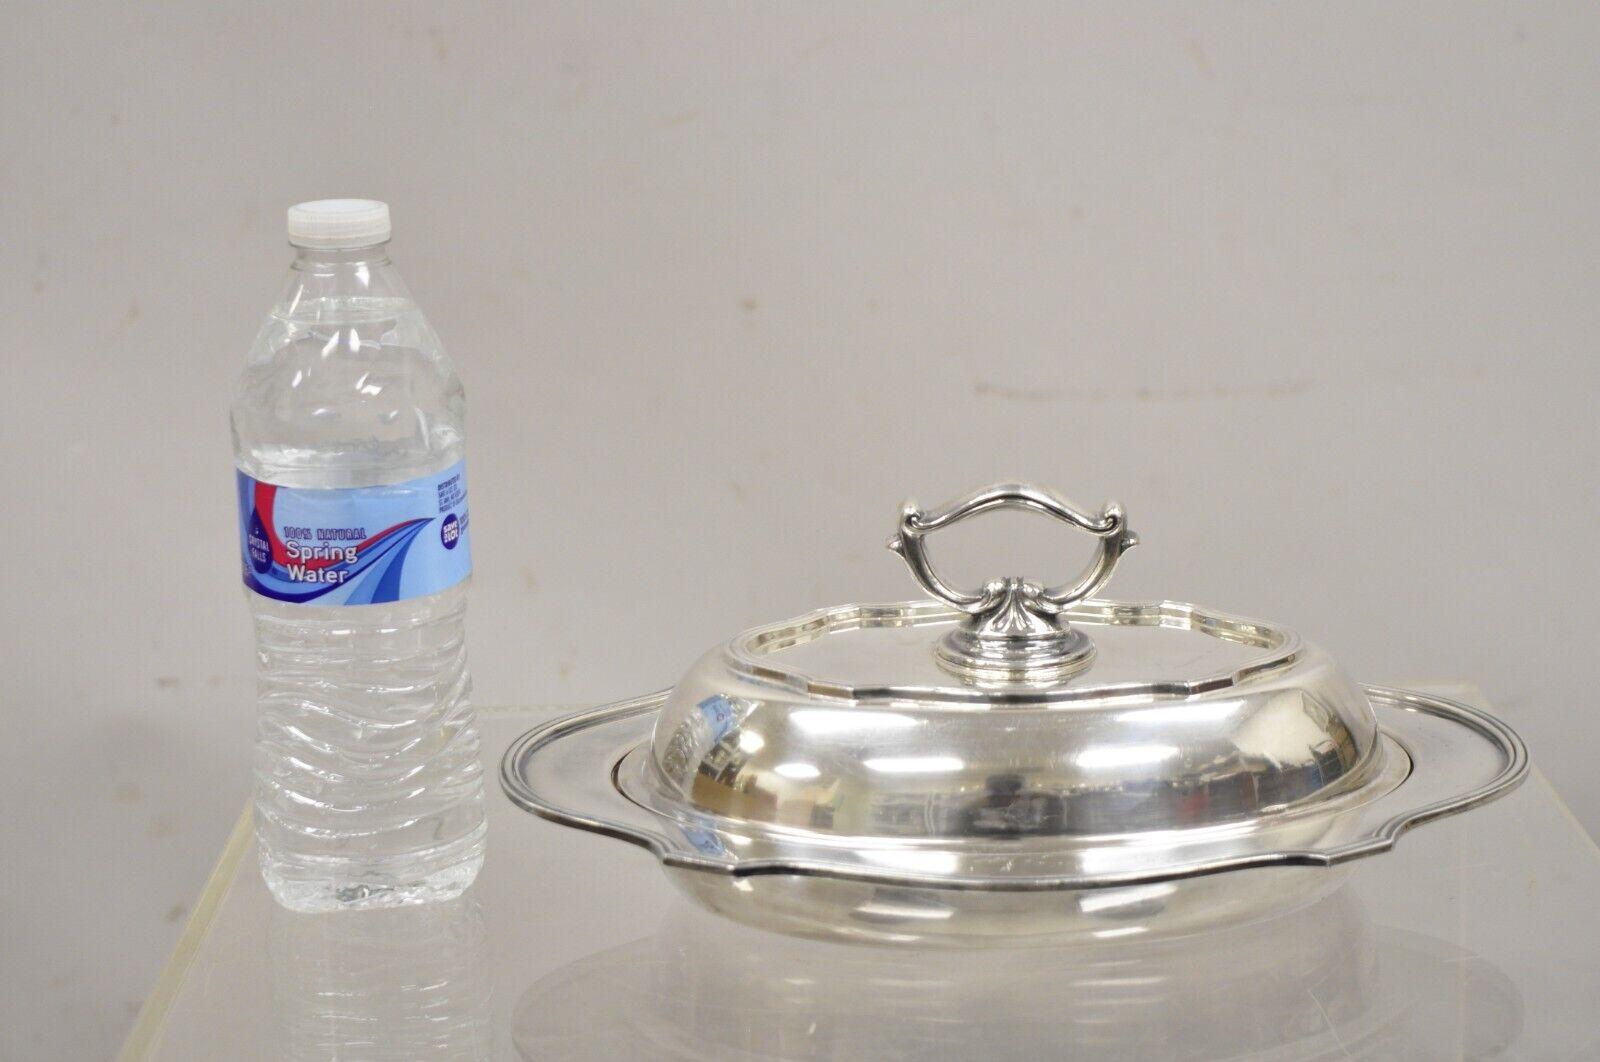 Vintage LBS Co Sheffield Silver Plated Lidded Vegetable Serving Dish For Sale 4